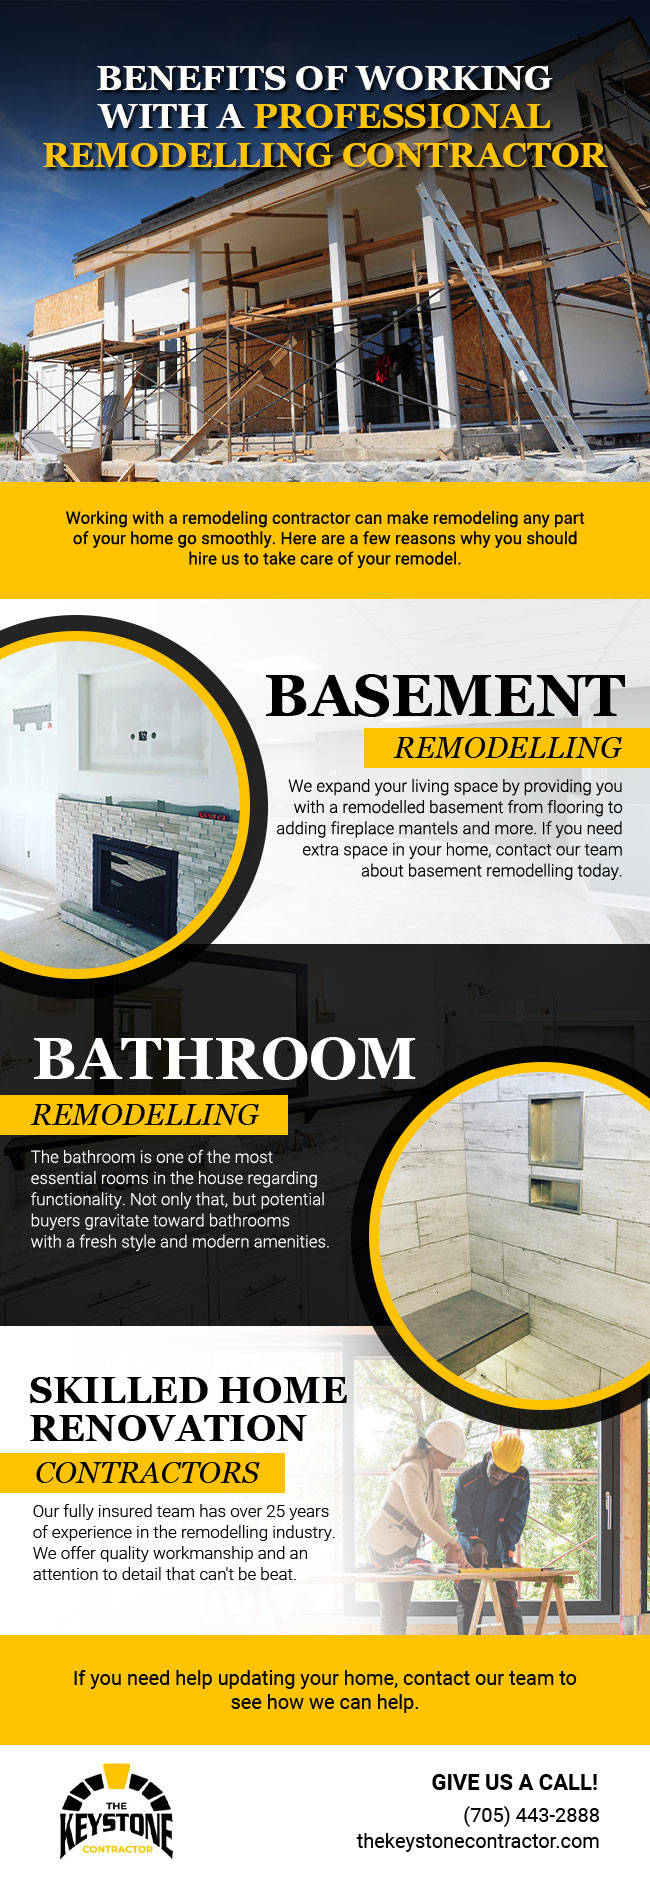 Benefits of working with a professional remodelling contractor